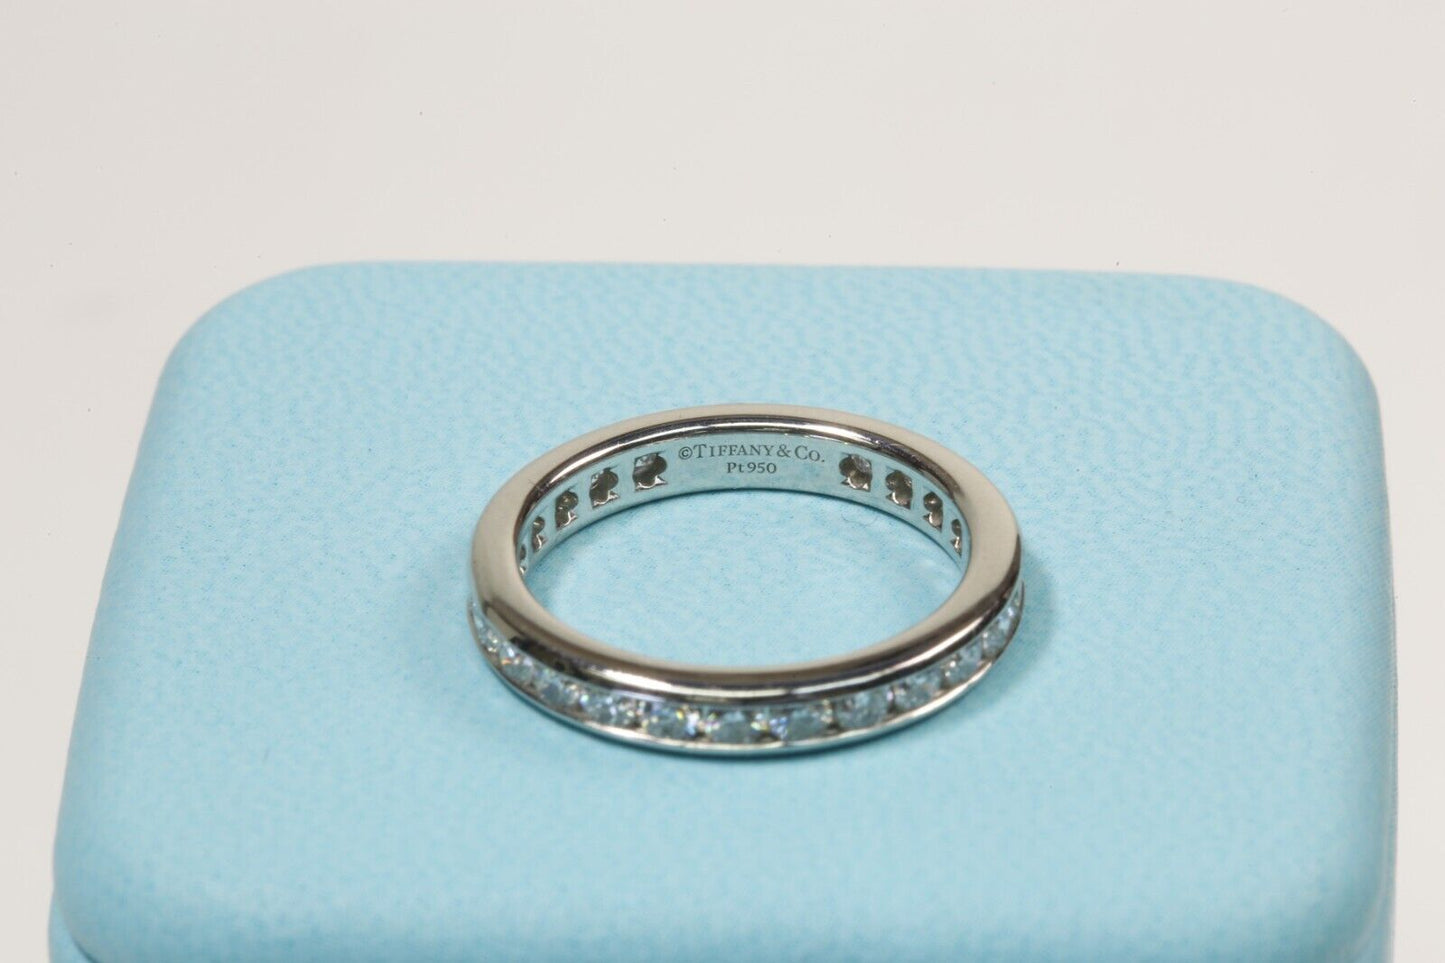 Tiffany & Co. Full Circle Eternity Platinum Band 1.00 Ct. TW 3mm Wide Size 5.5